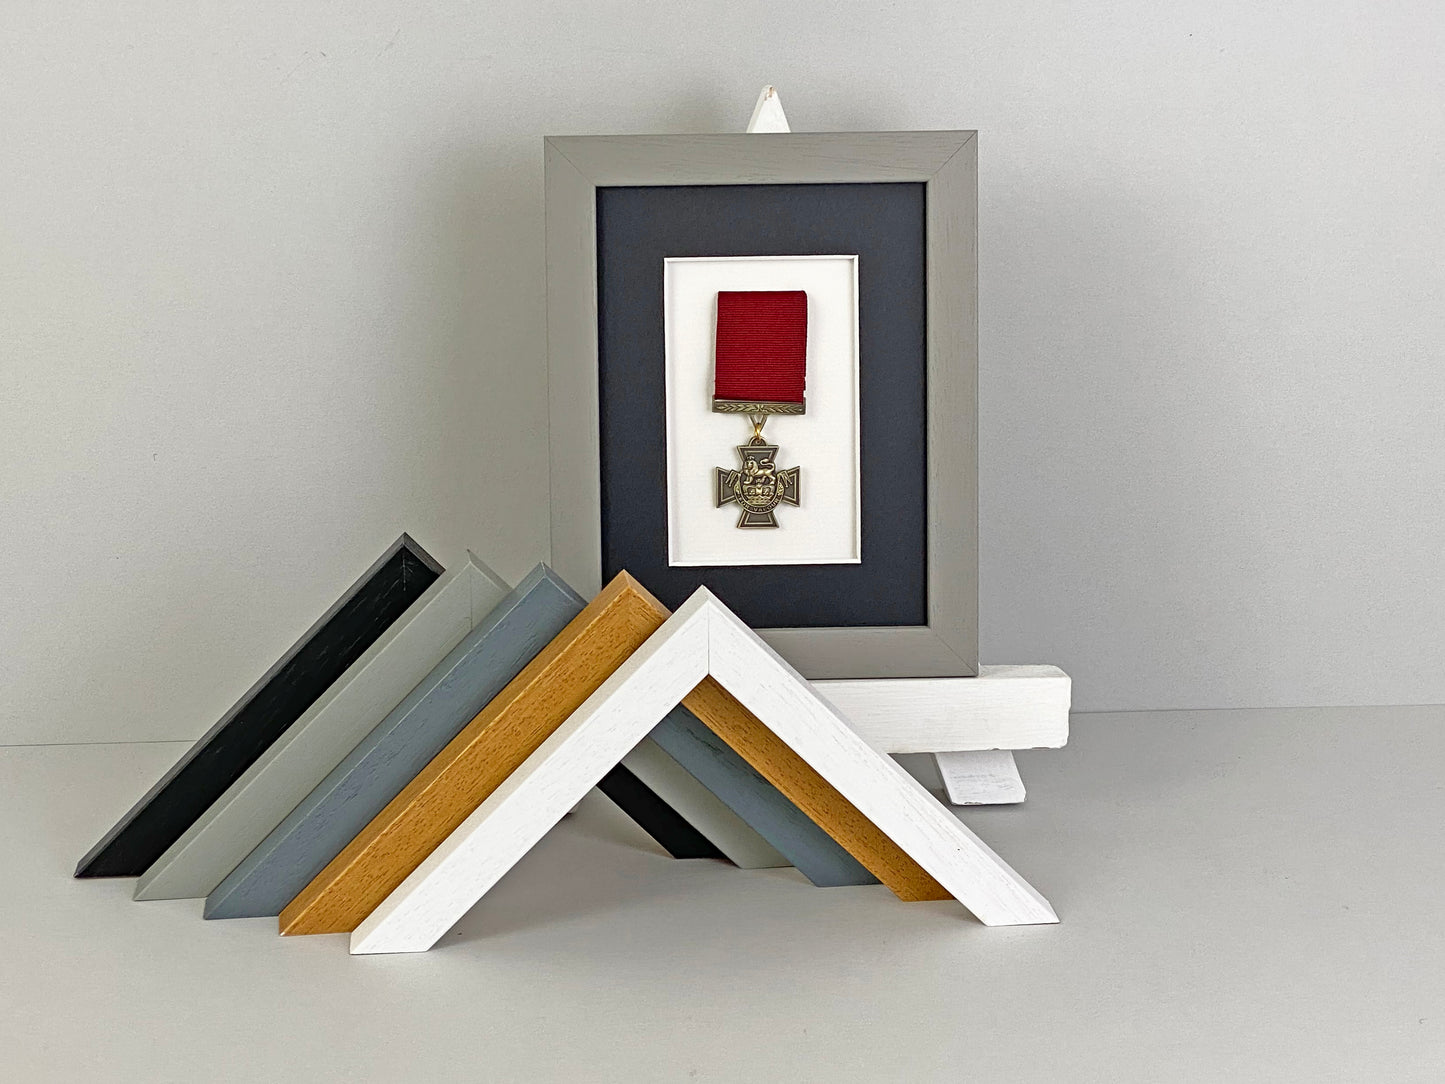 Military and Service Medal display Frame for 1 Medal. 8x6"